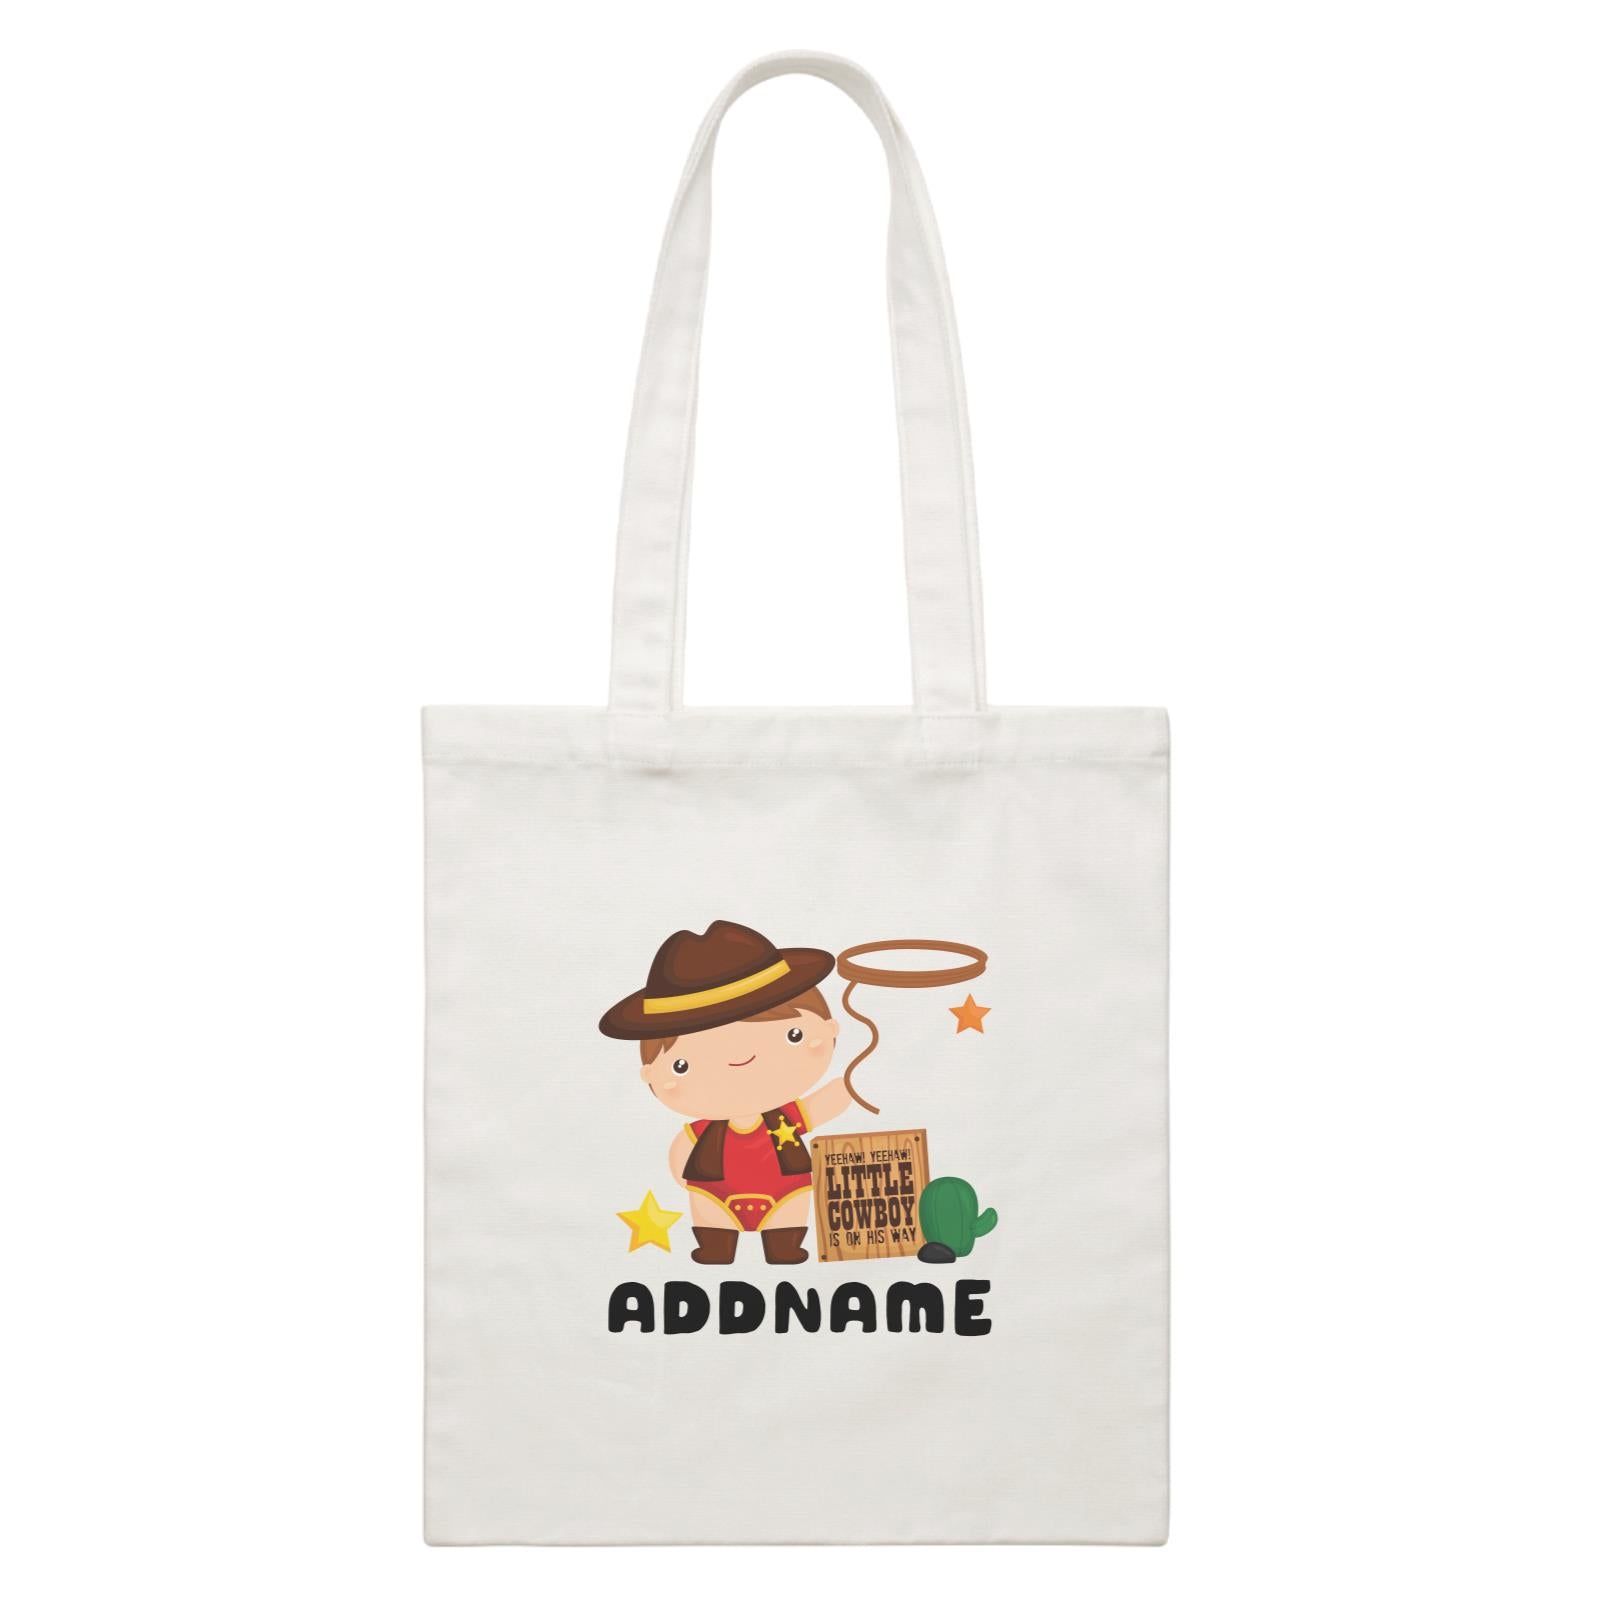 Birthday Cowboy Style Yeehaw Little Cowboy Is On His Way Addname White Canvas Bag